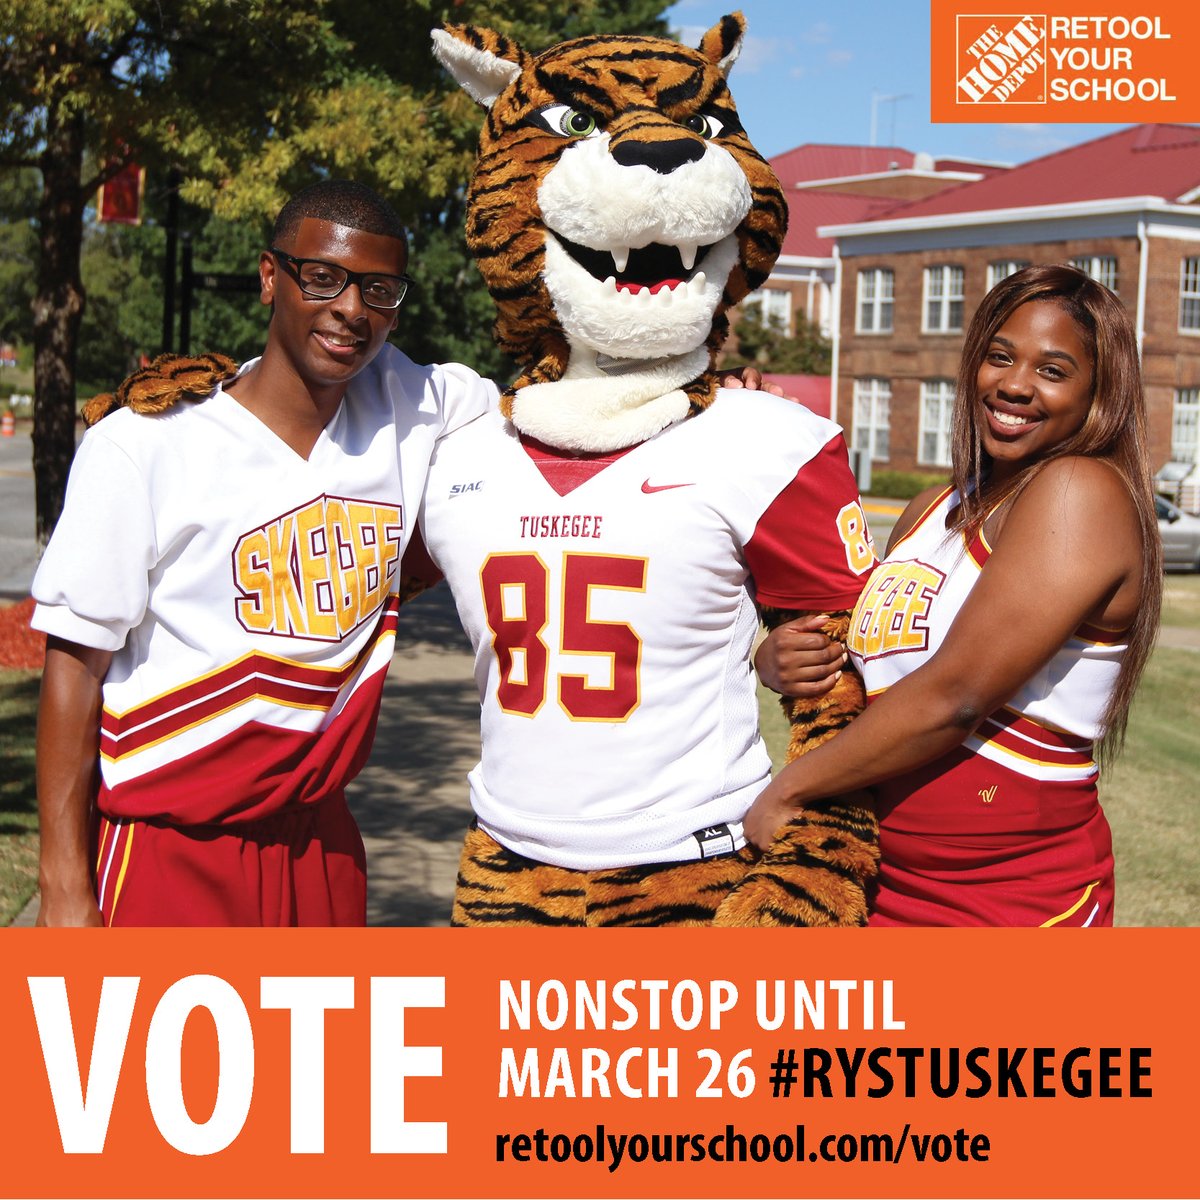 TU students, alumni and supporters—call your crew! Develop your large voting team that includes extended family members, friends, co-workers, church family, Greek brothers, and sisters, etc. VOTE TODAY at retoolyourschool.com/vote #RYSTUSKEGEE